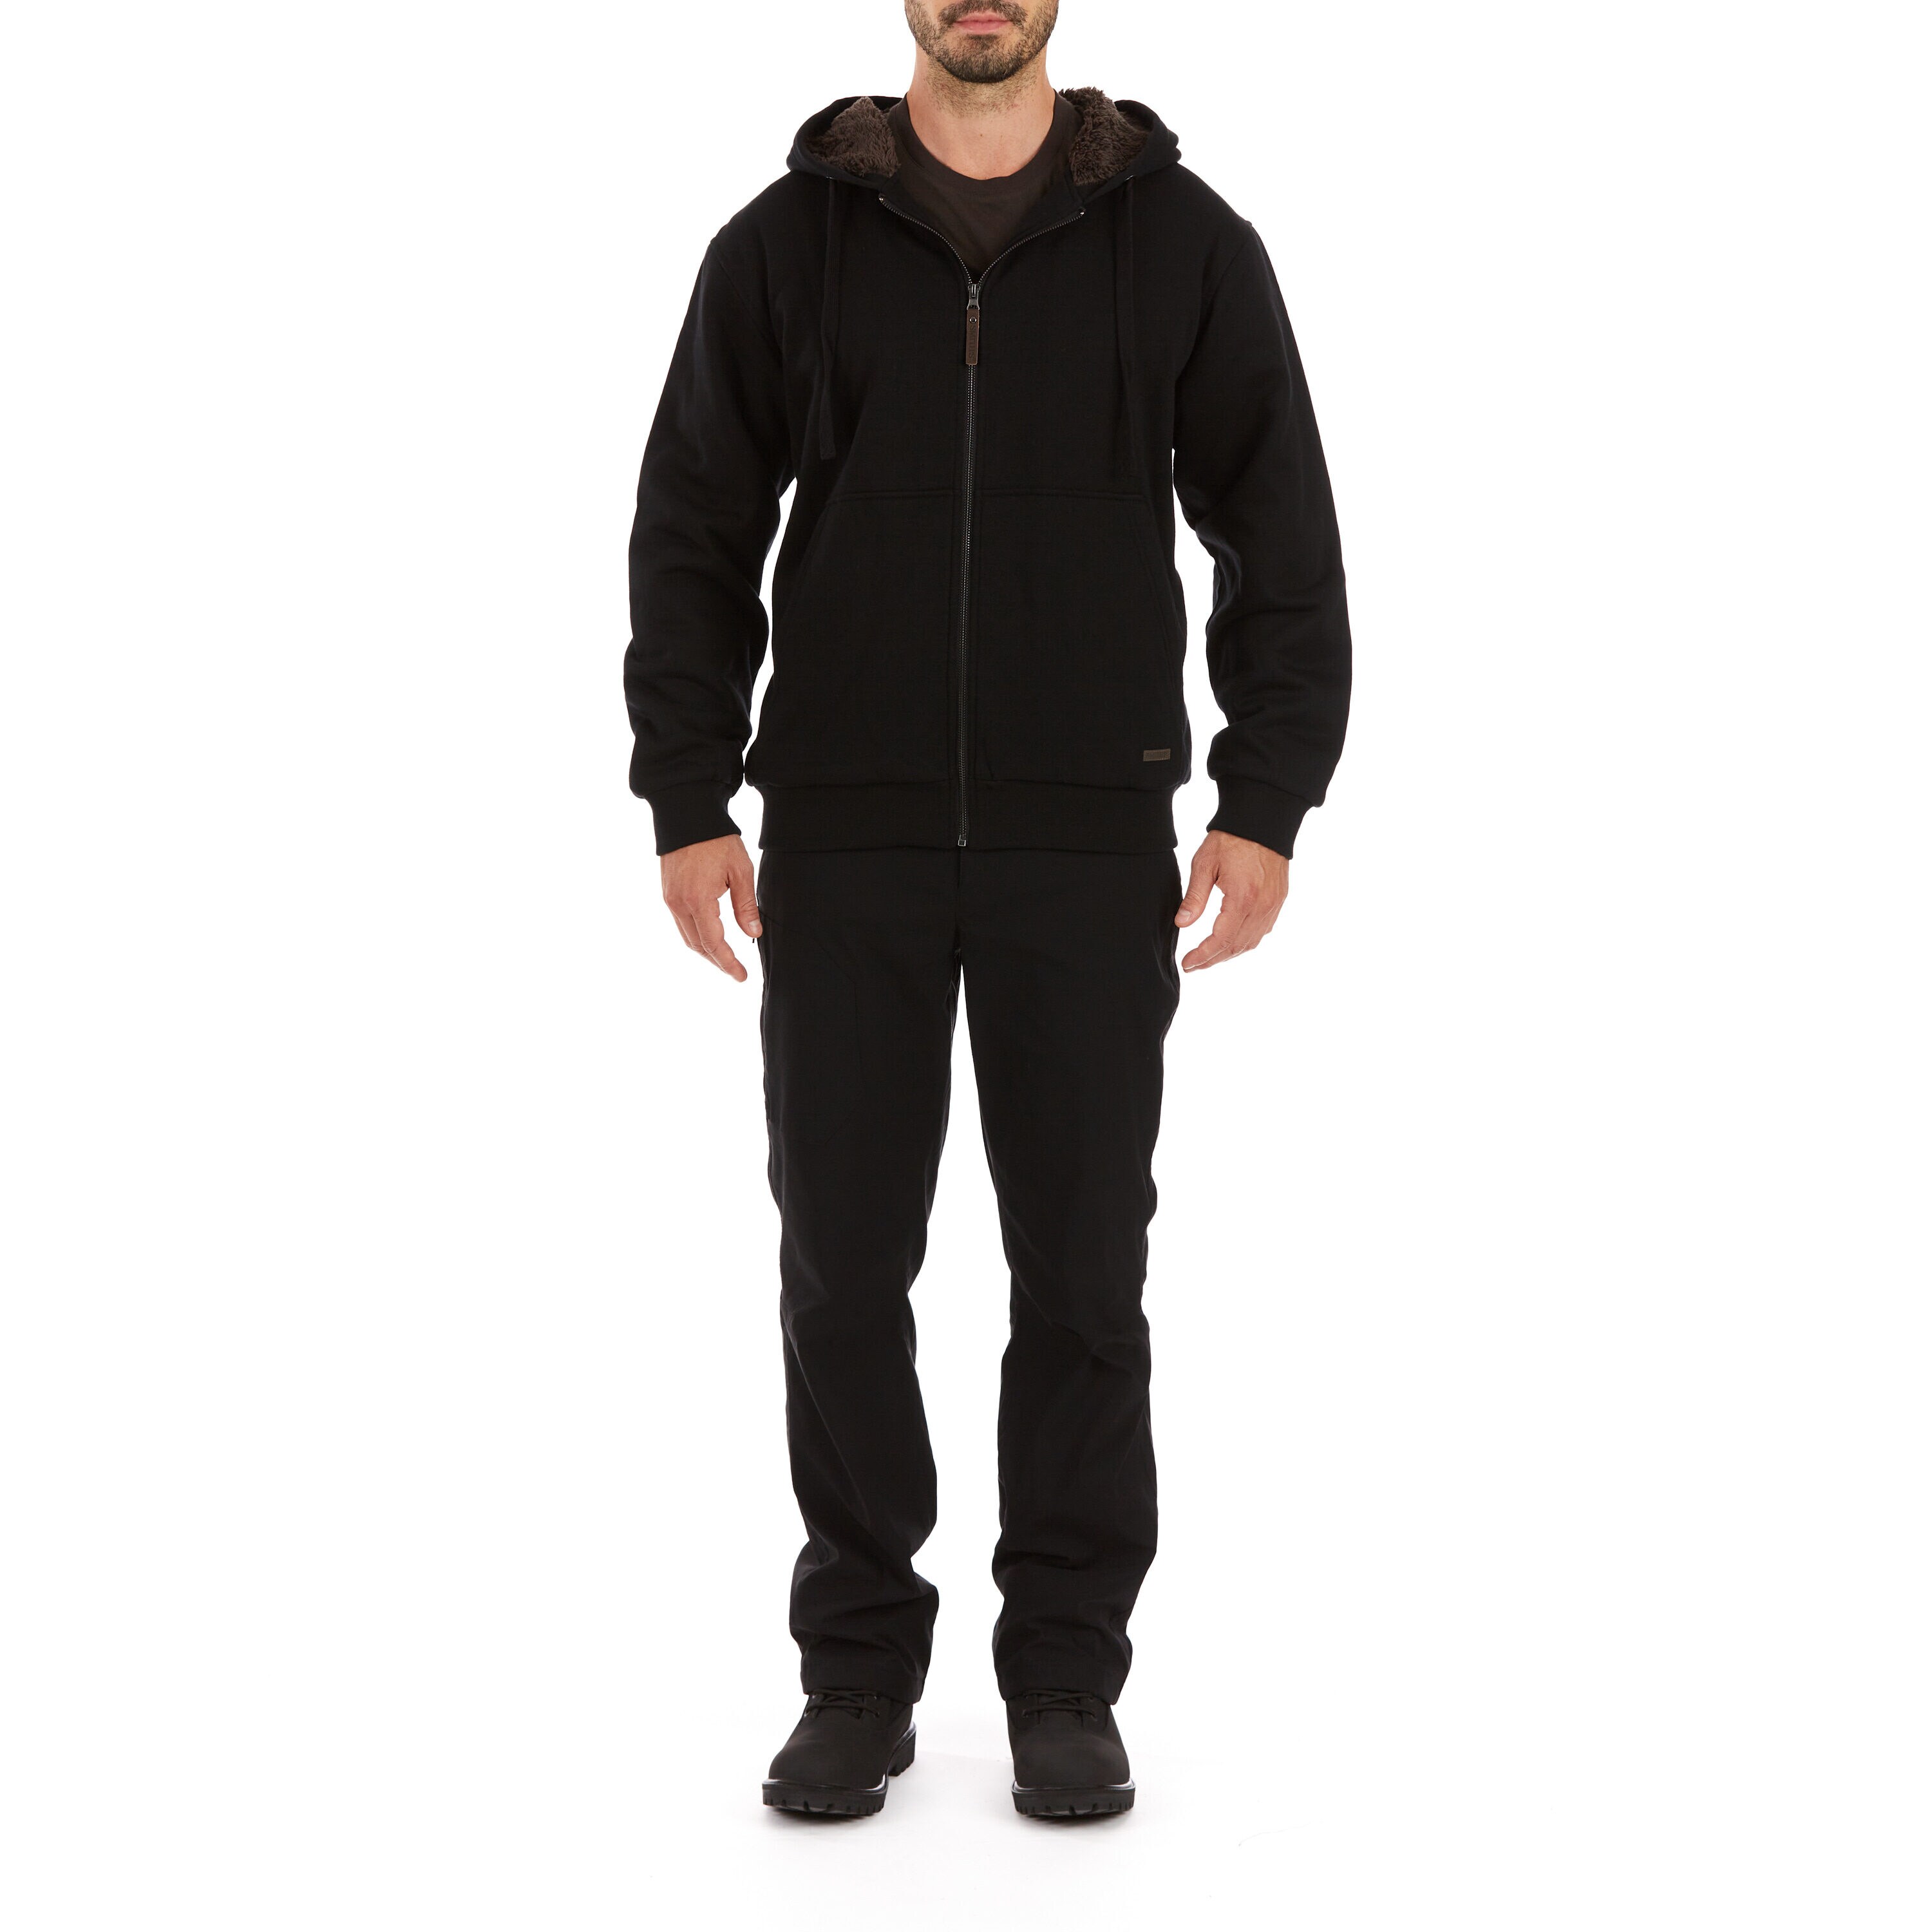 Free Country Men's Black Polyester Hooded Insulated Fleece (2X Large)